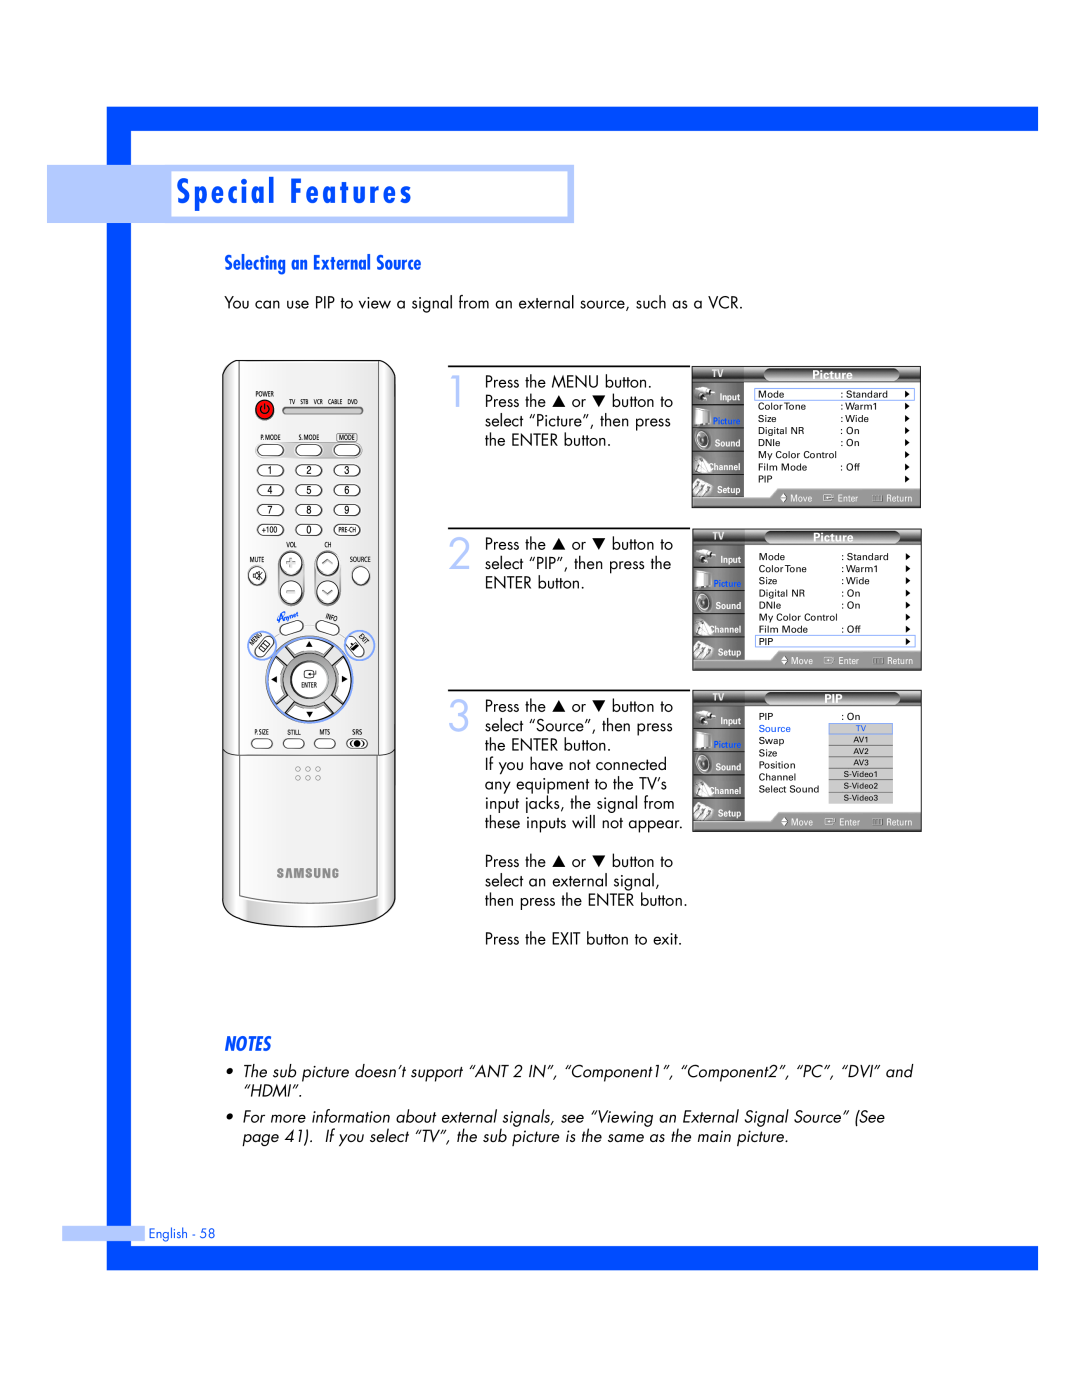 Samsung HL-P4674W instruction manual Selecting an External Source, Special Features 